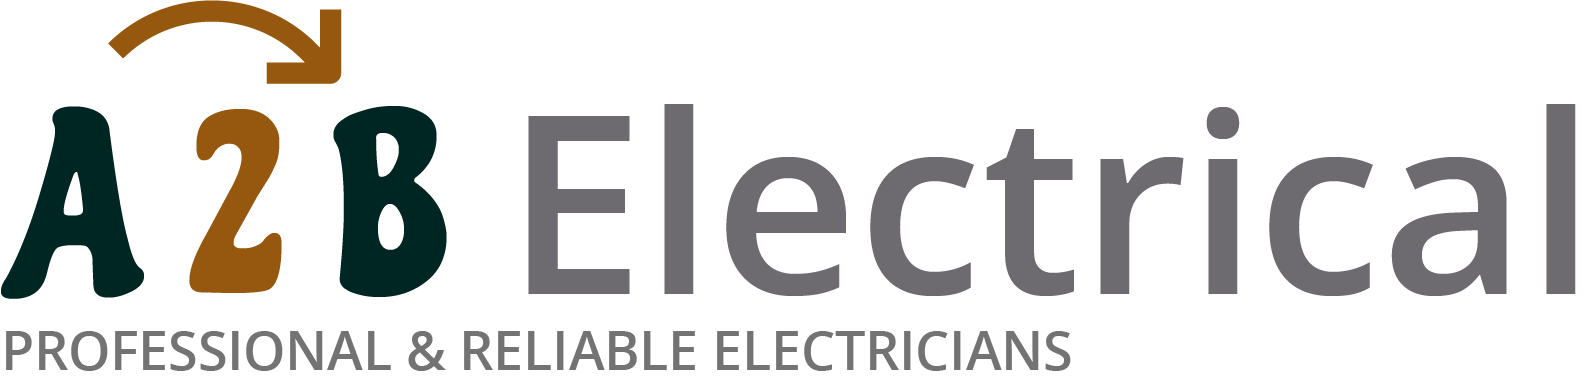 If you have electrical wiring problems in Lancing, we can provide an electrician to have a look for you. 